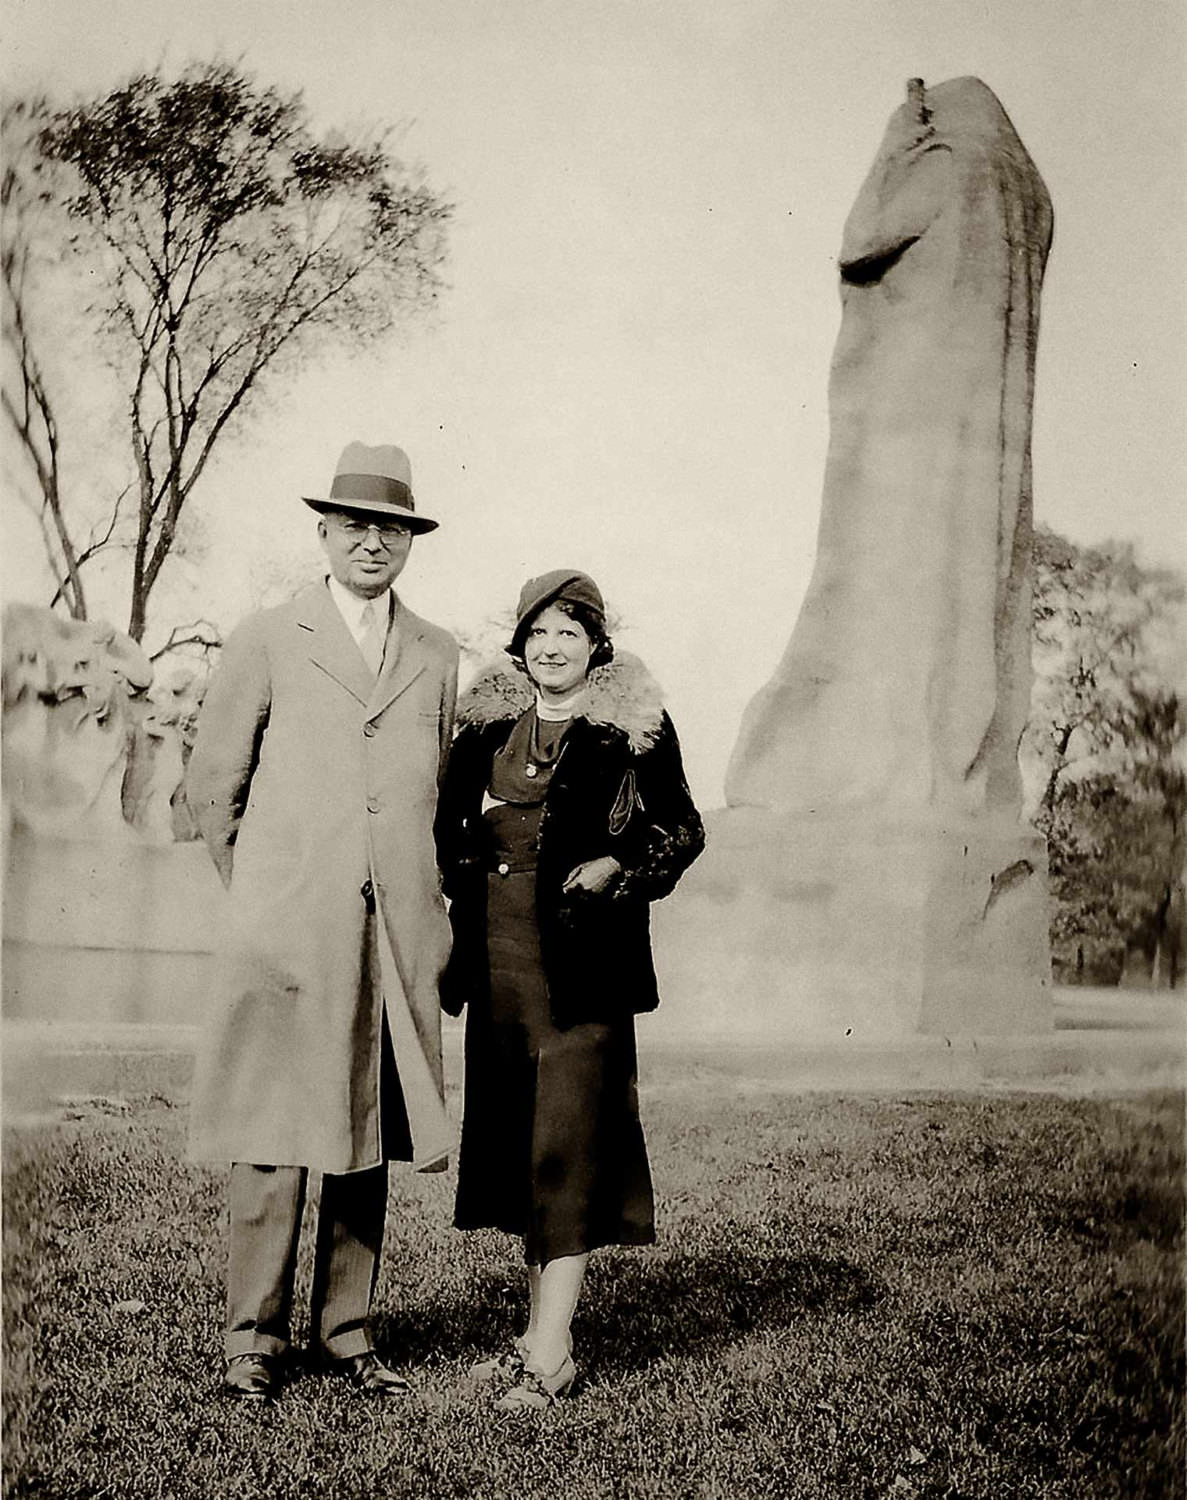 A couple stands near a statue in an unknown location, 1951.